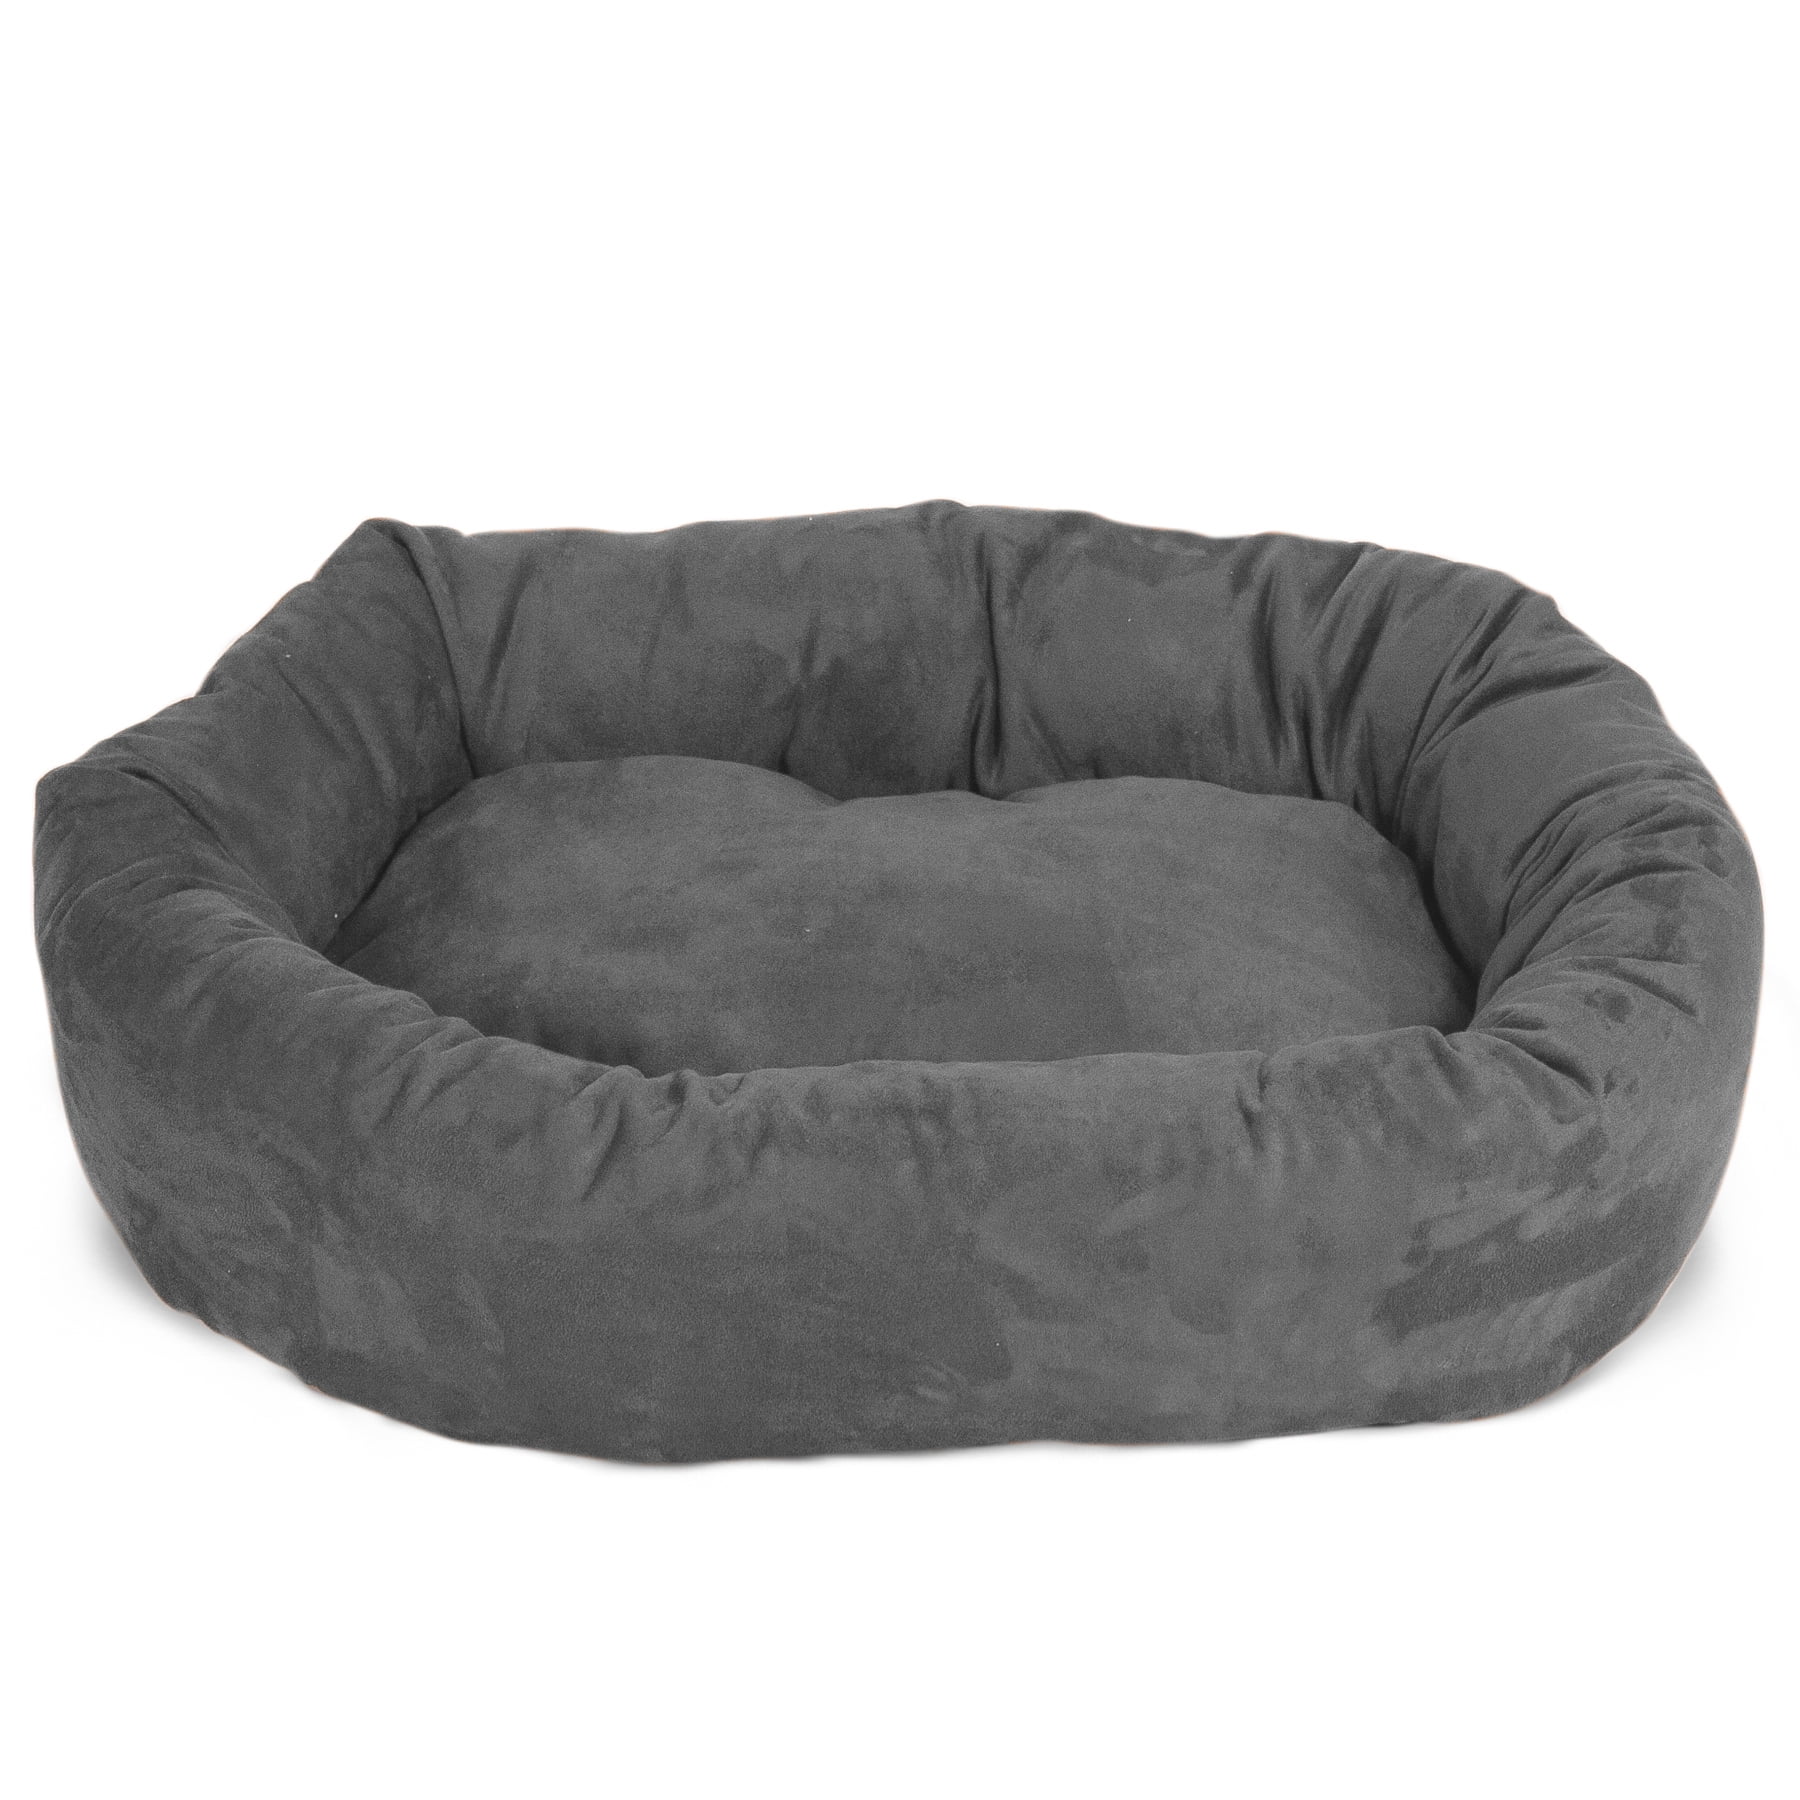 Majestic Pet | Suede Bagel Pet Bed For Dogs, Chocolate, Large - Walmart.com